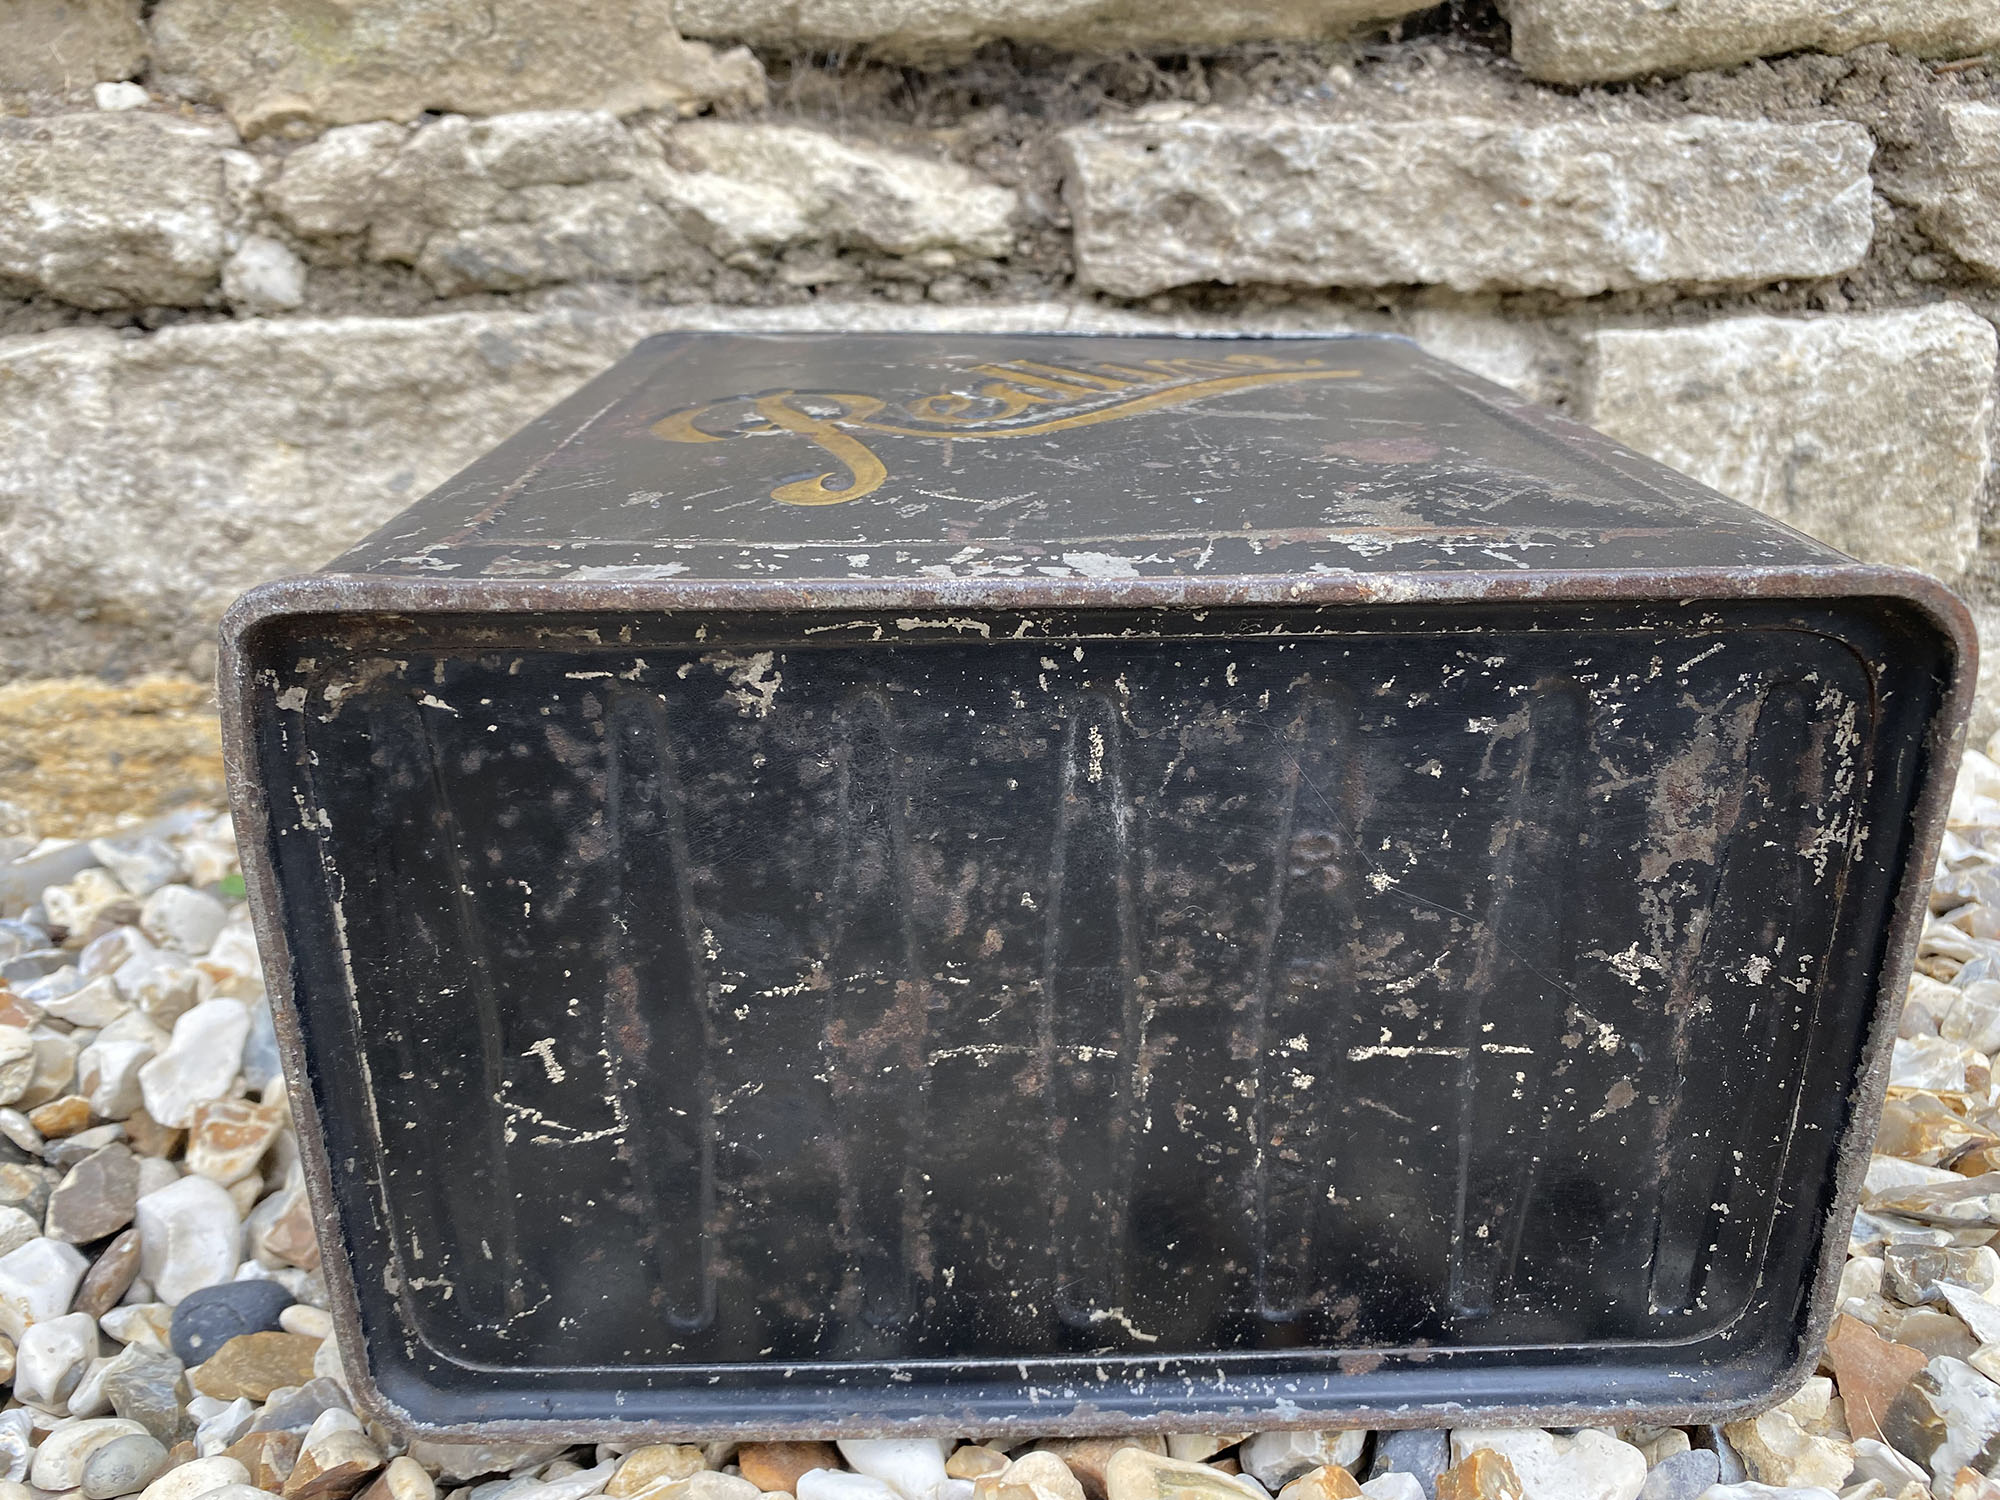 A Redline two gallon petrol can with original cap, and in original condition. - Image 4 of 4